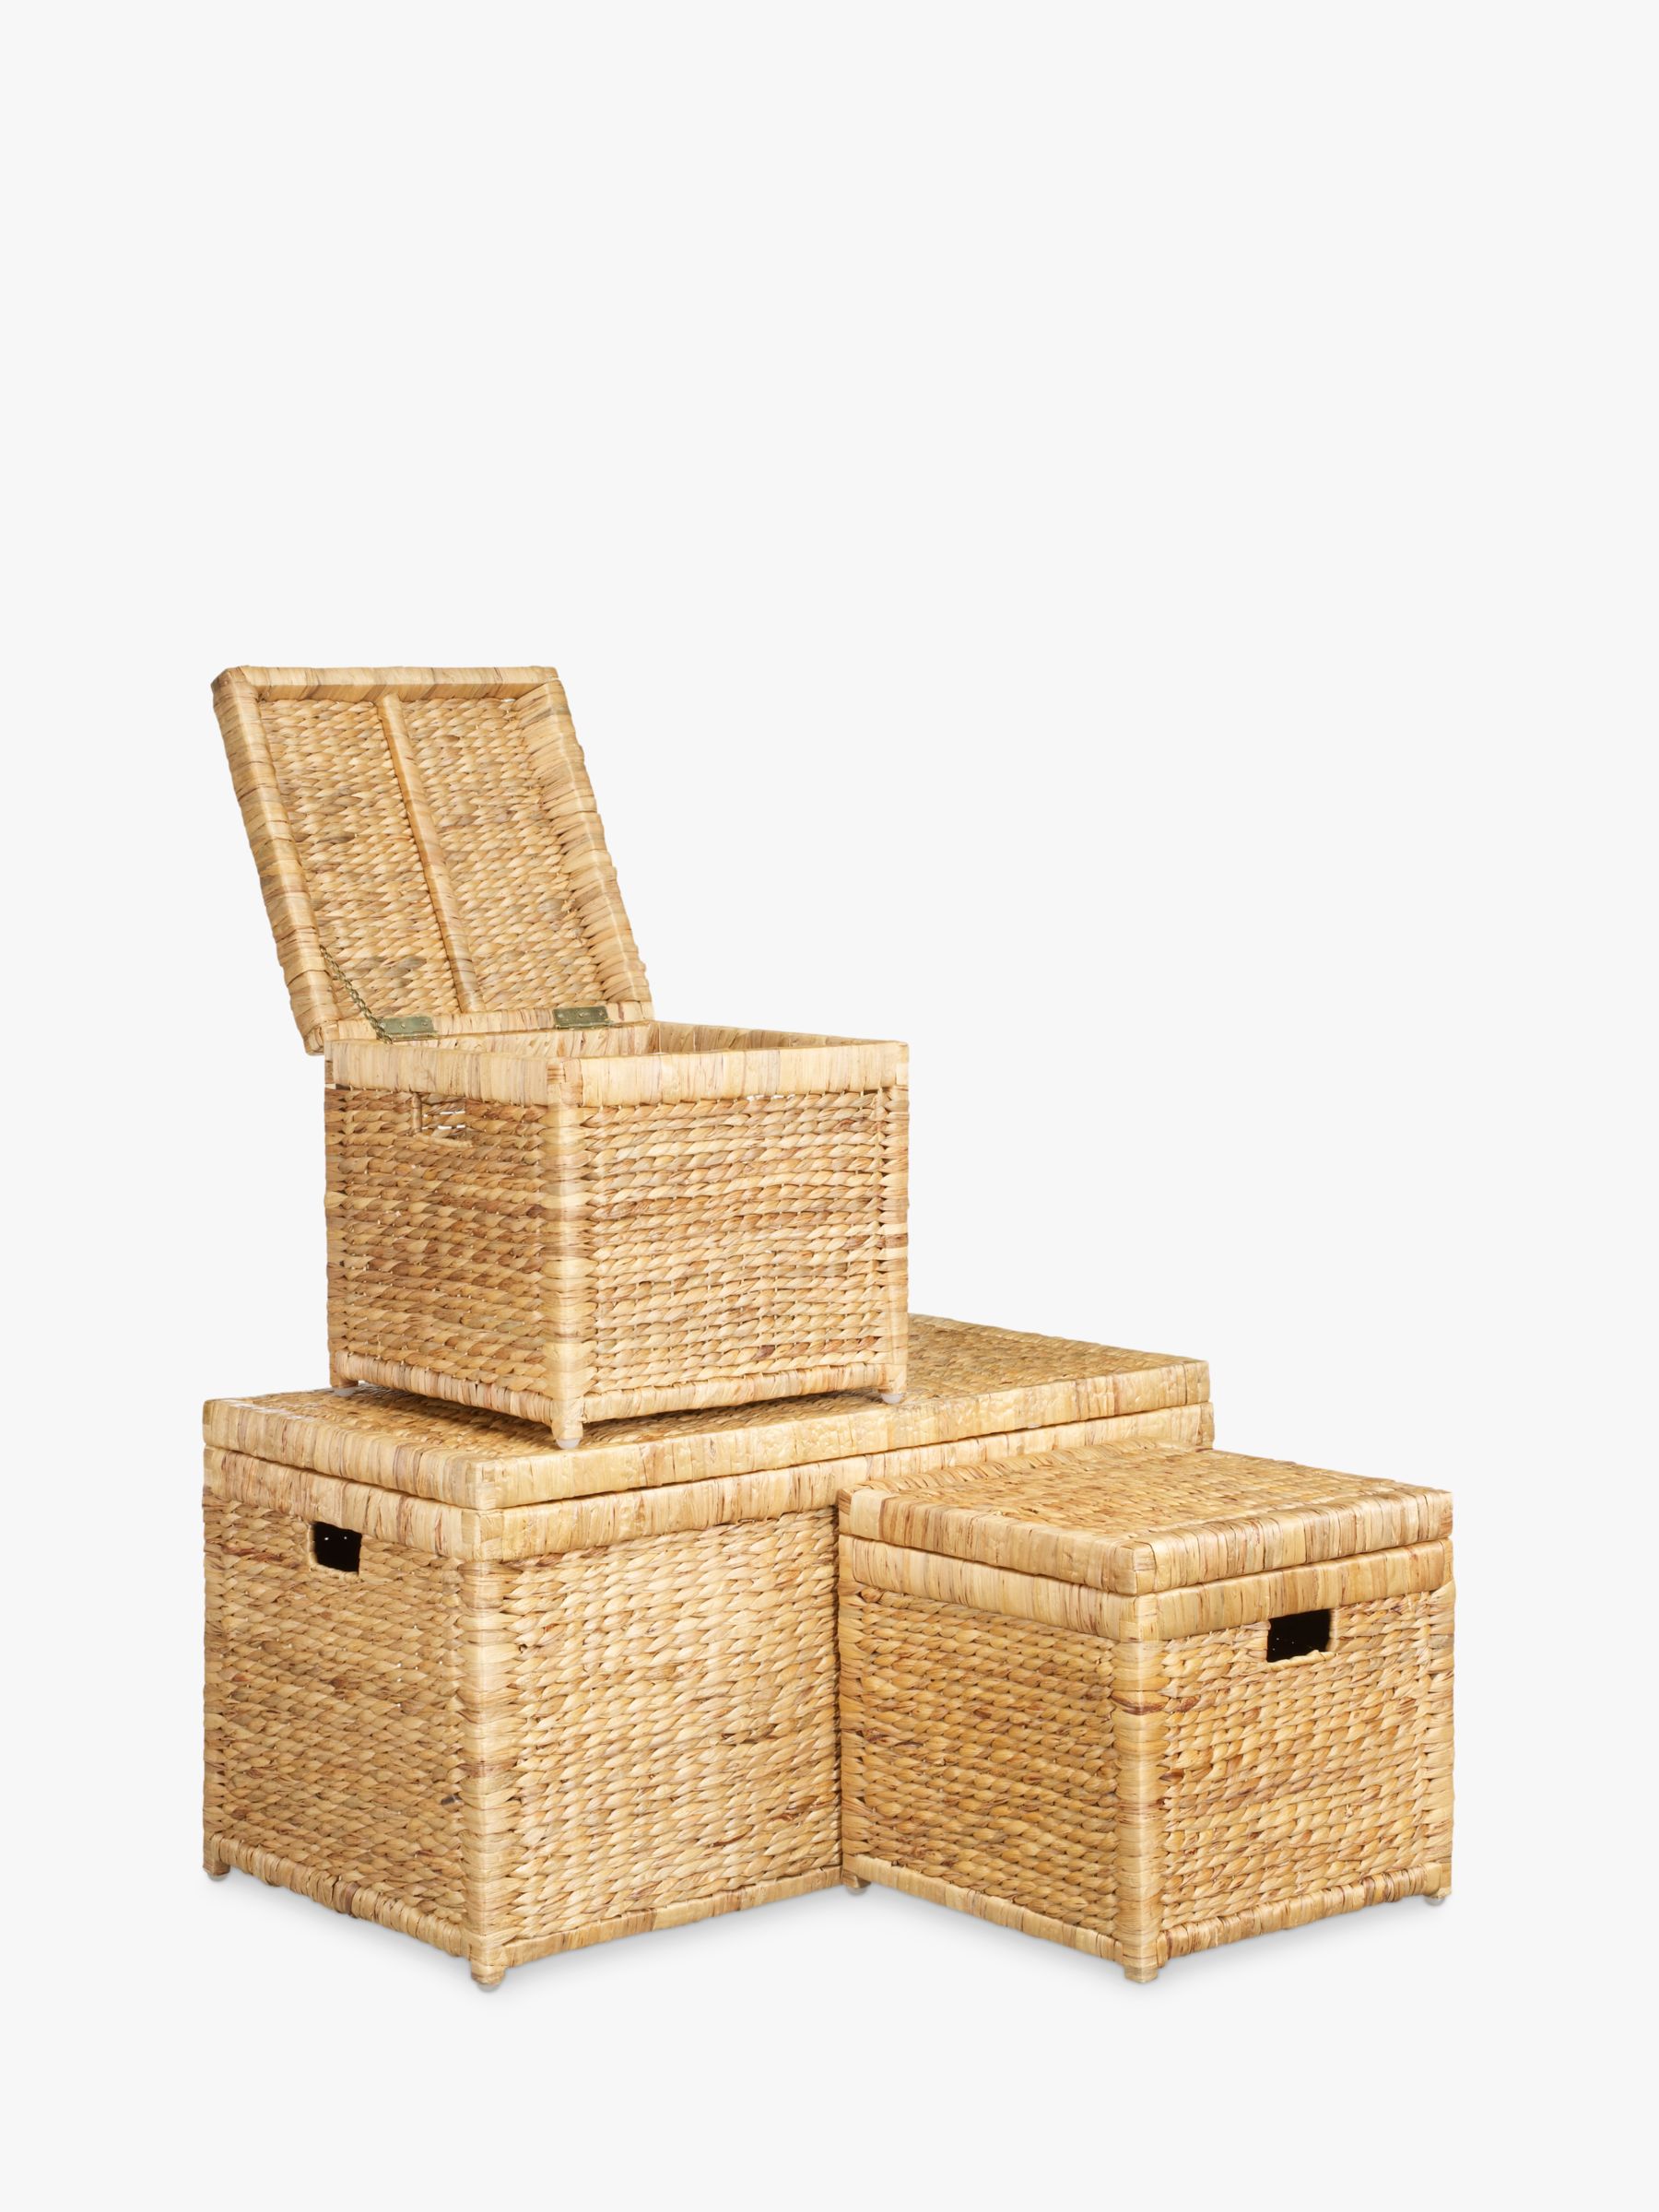 boxes and baskets